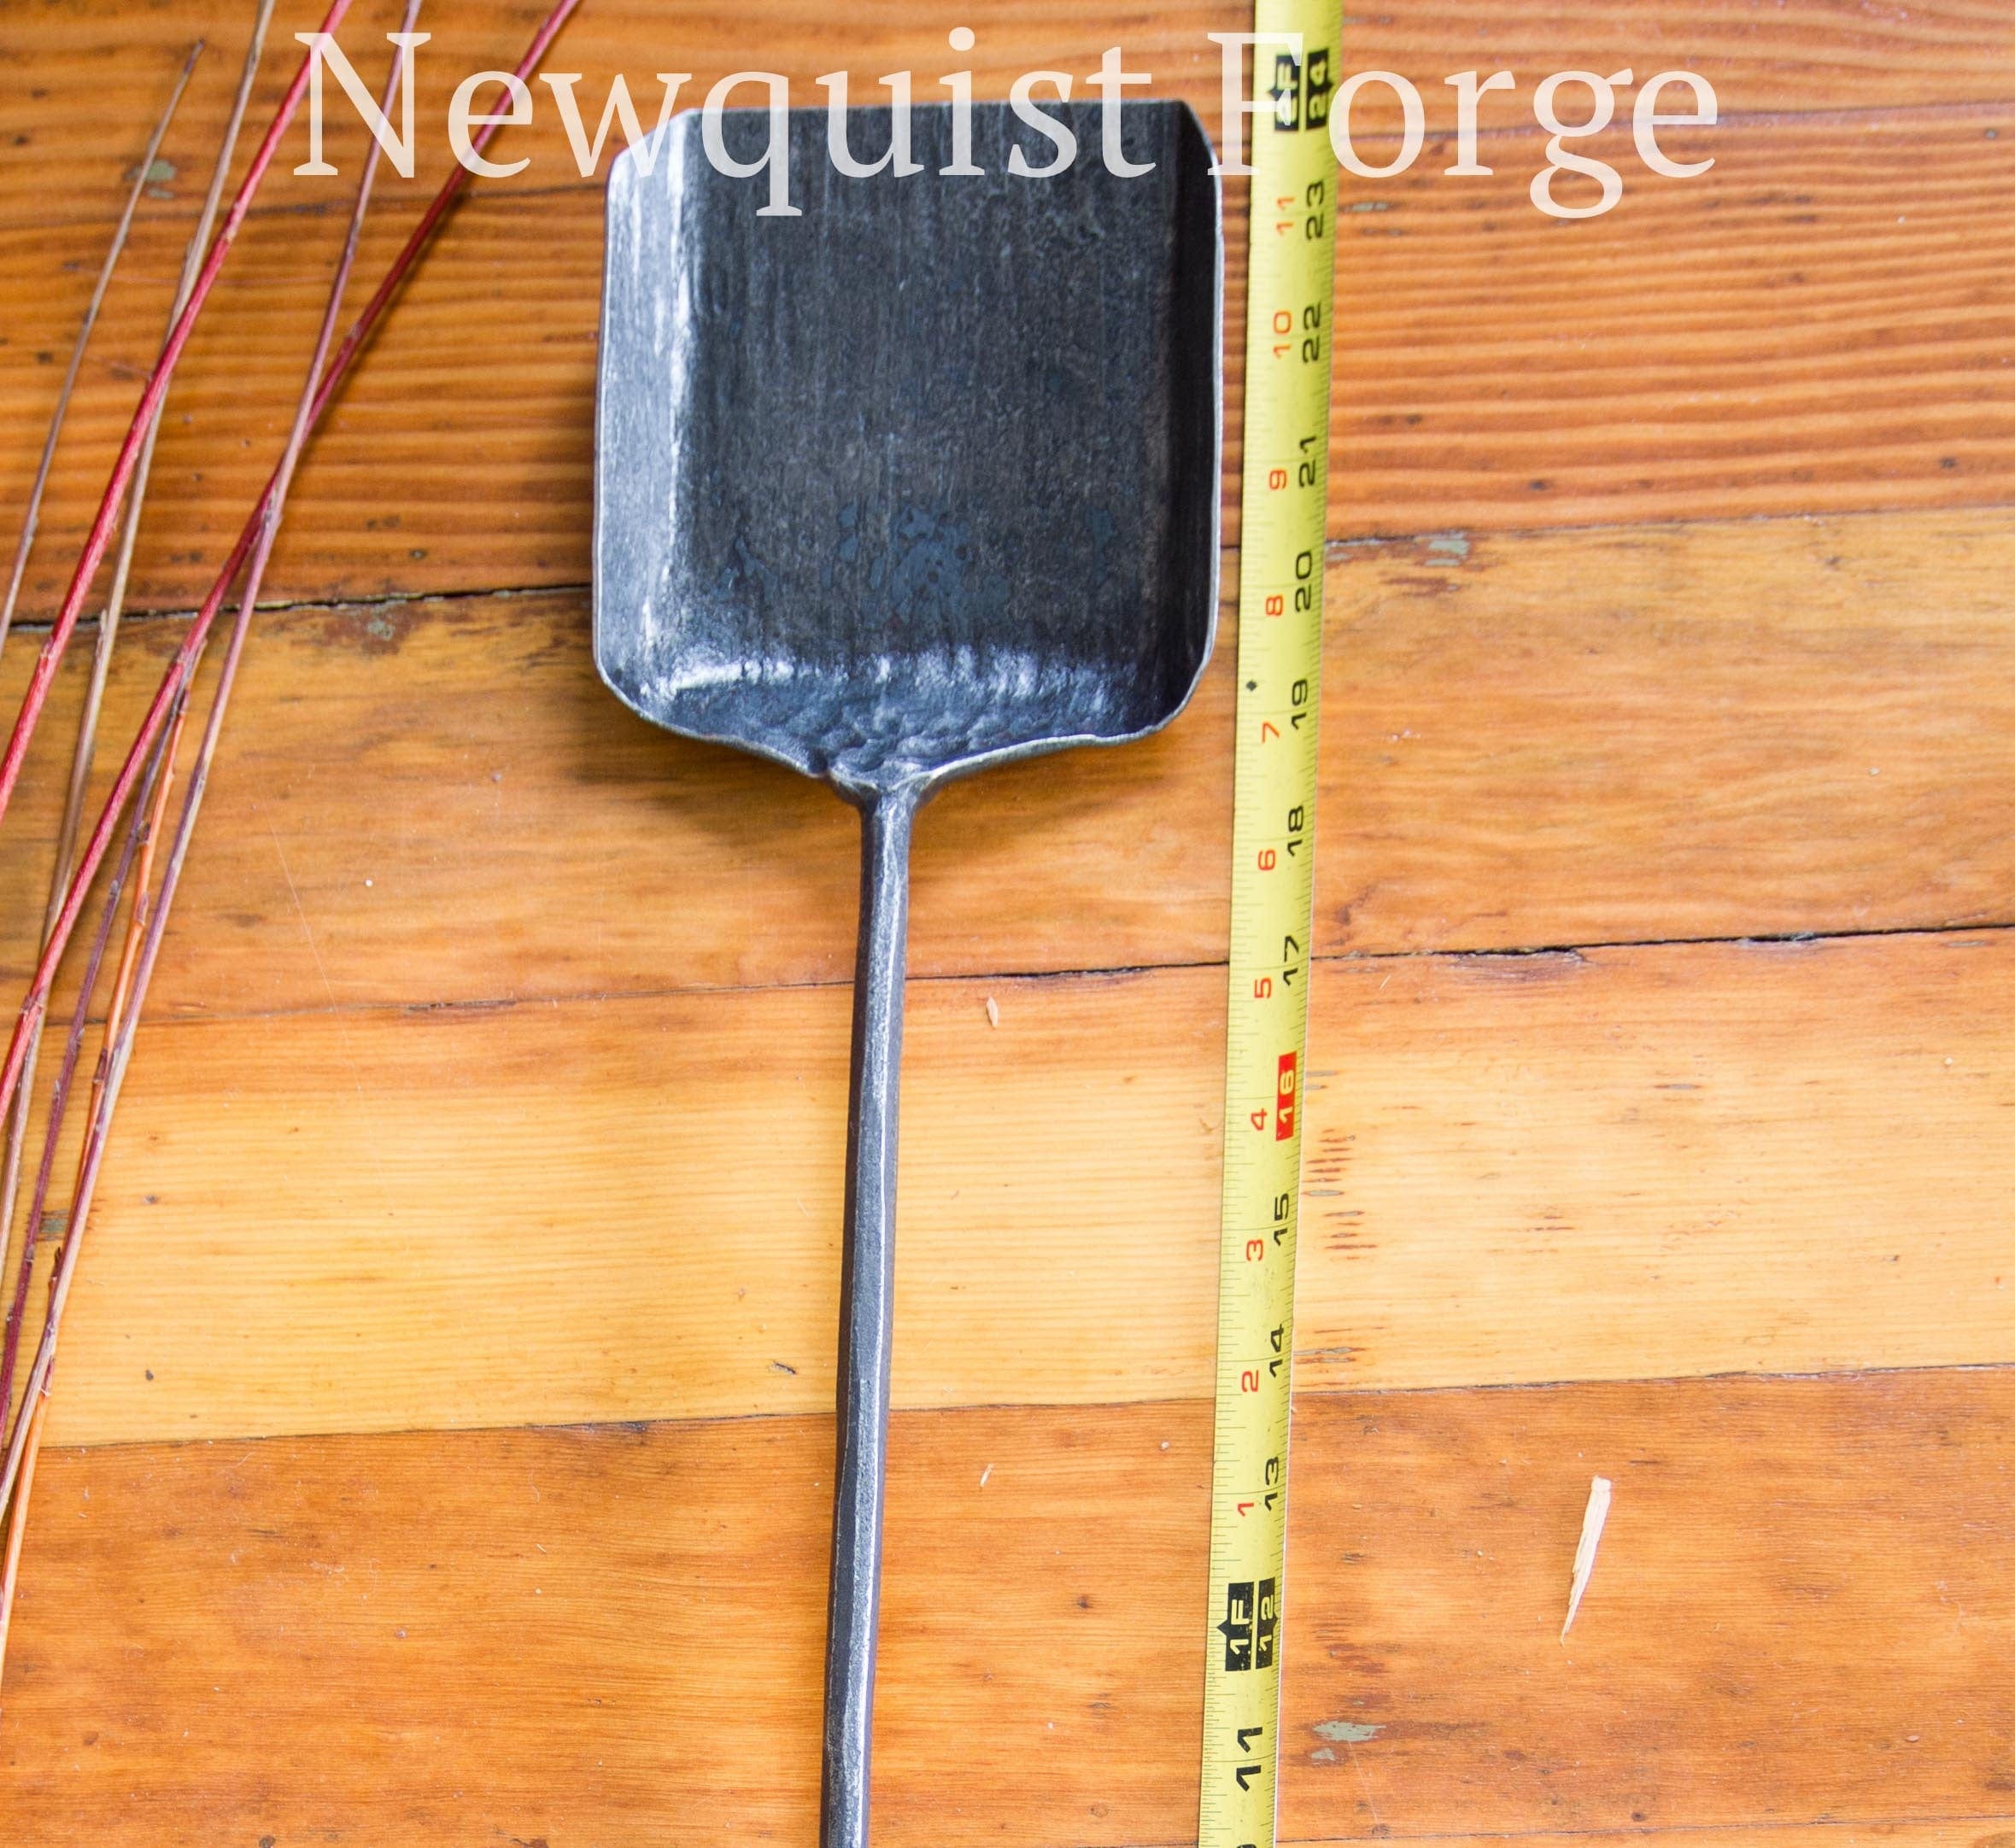 newquistforge Fire Tools Forged Steel Fireplace Shovel  •Fireplace Tools • Housewarming gift